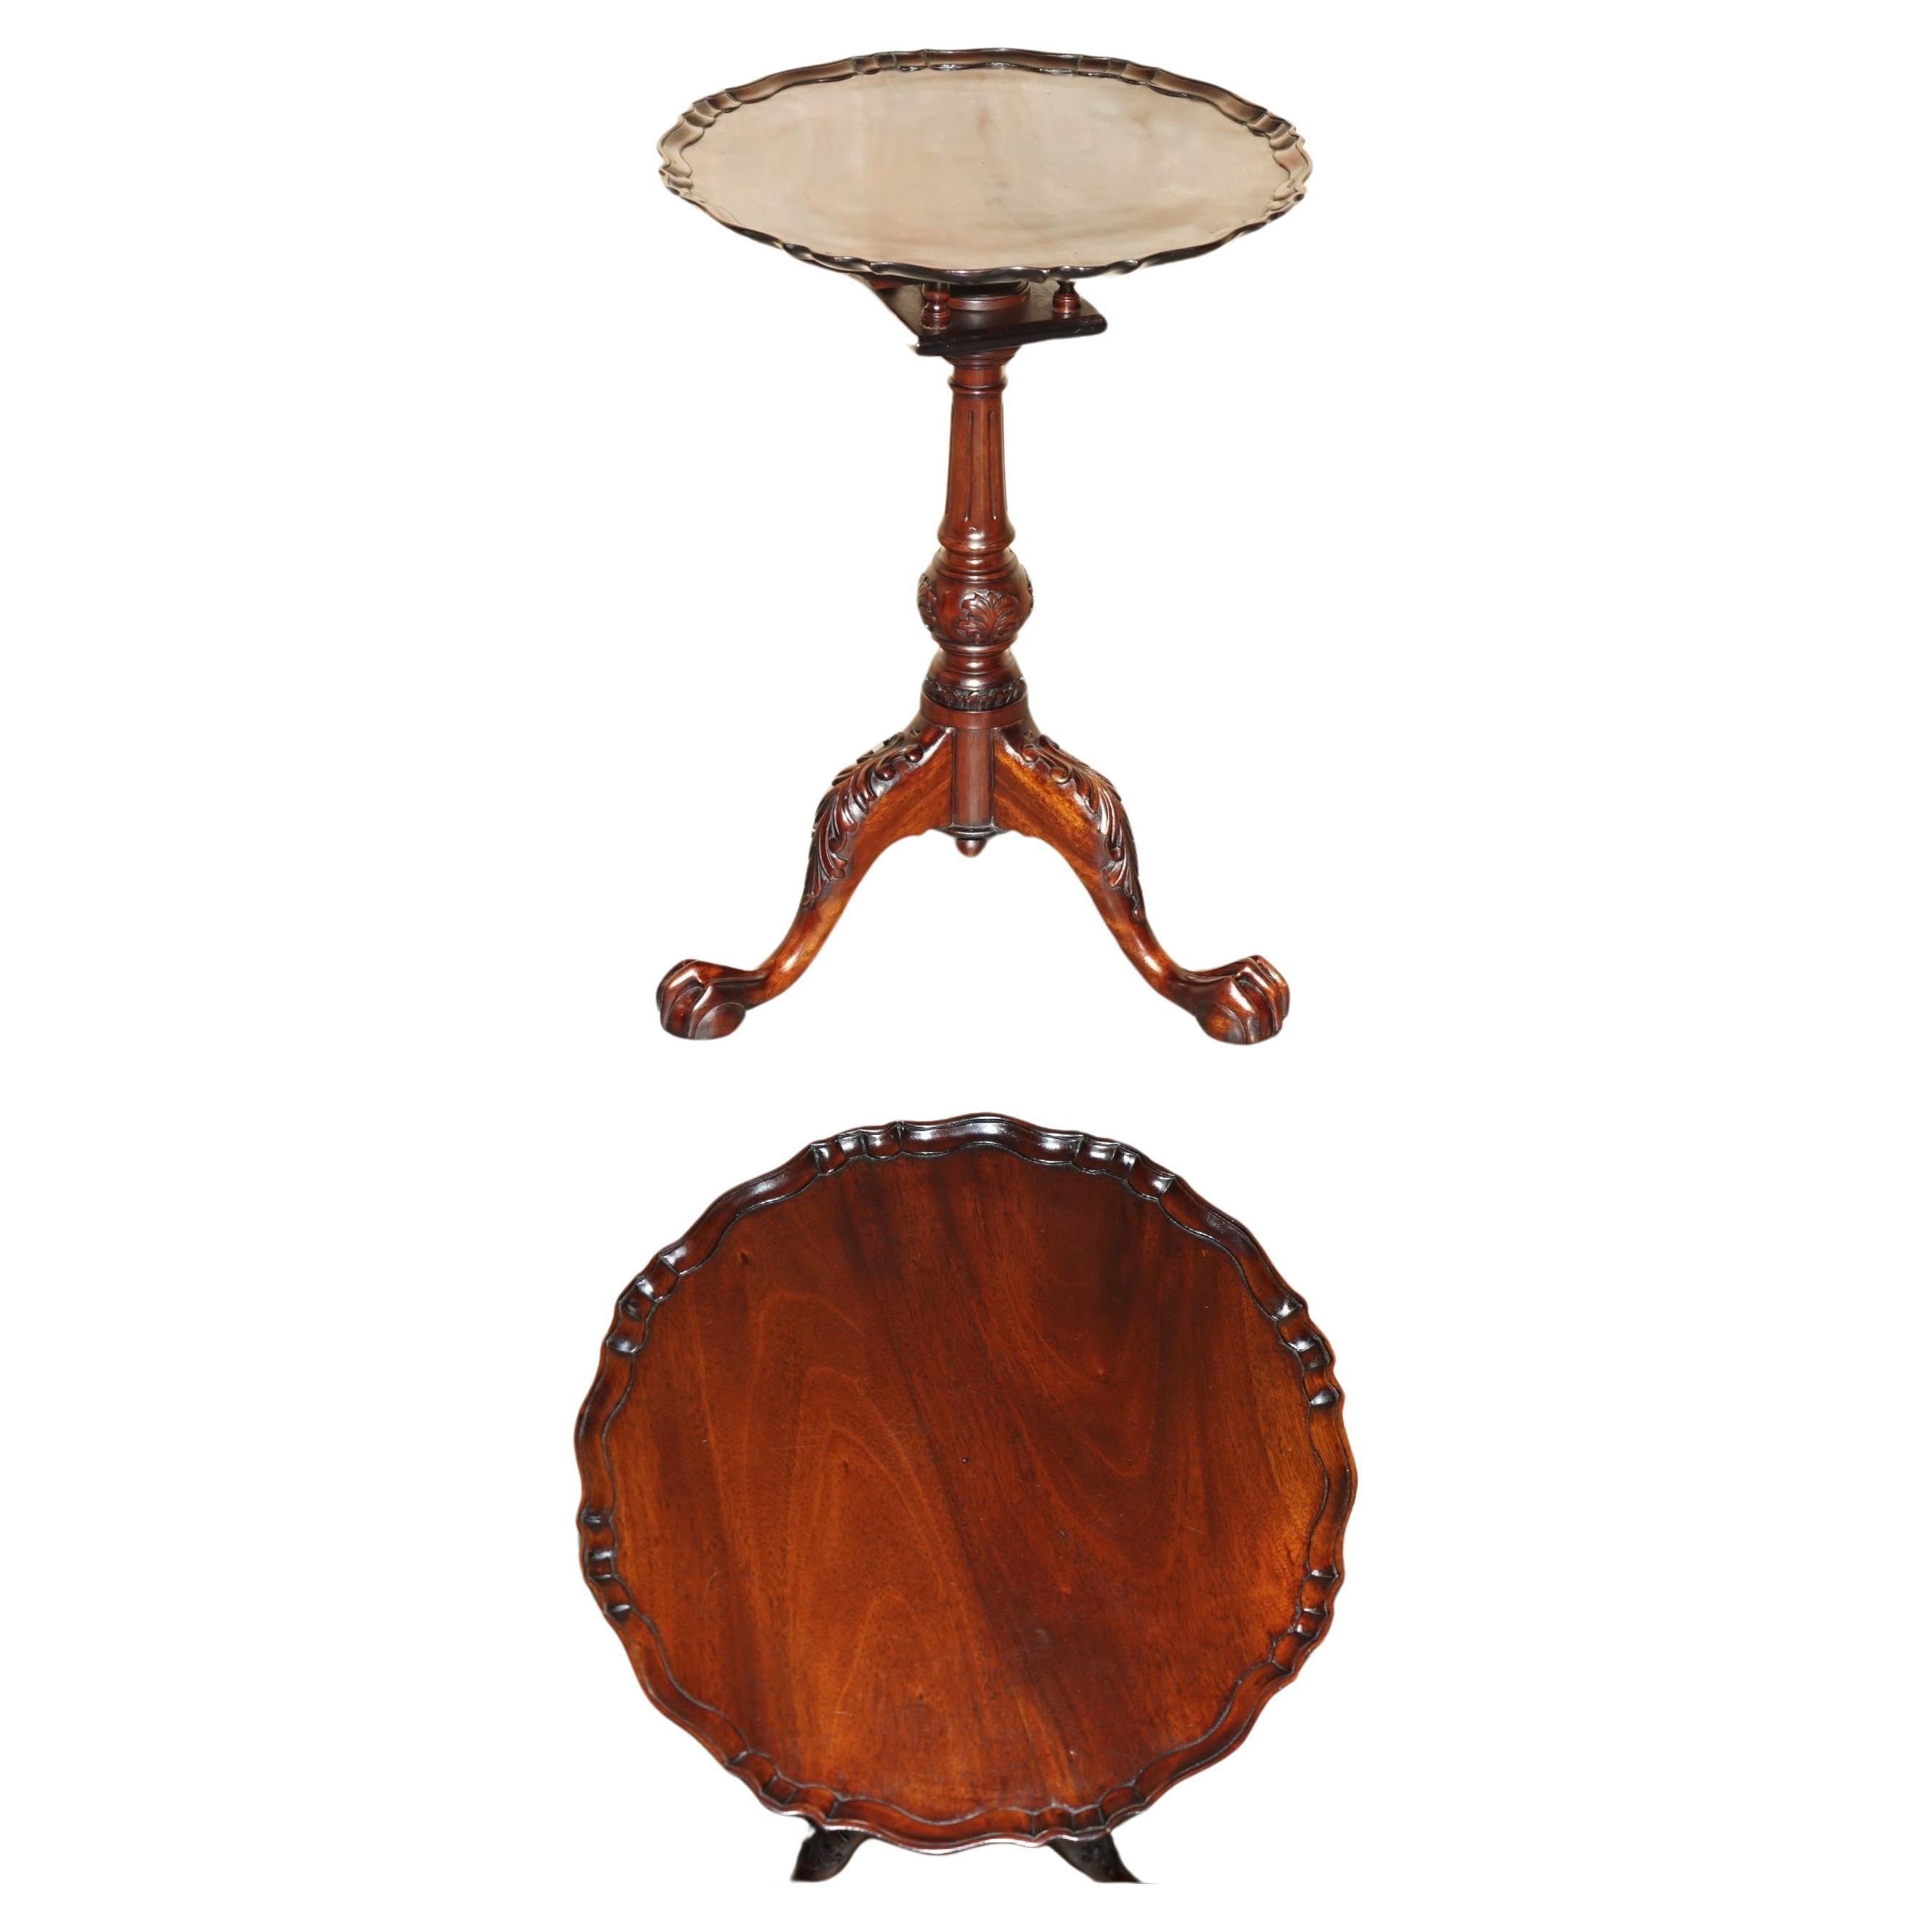 Top ROTATING TABLE THOMAS CHiPPENDALE CLAW & BALL VINTAGE FLAmed HARDWOOD